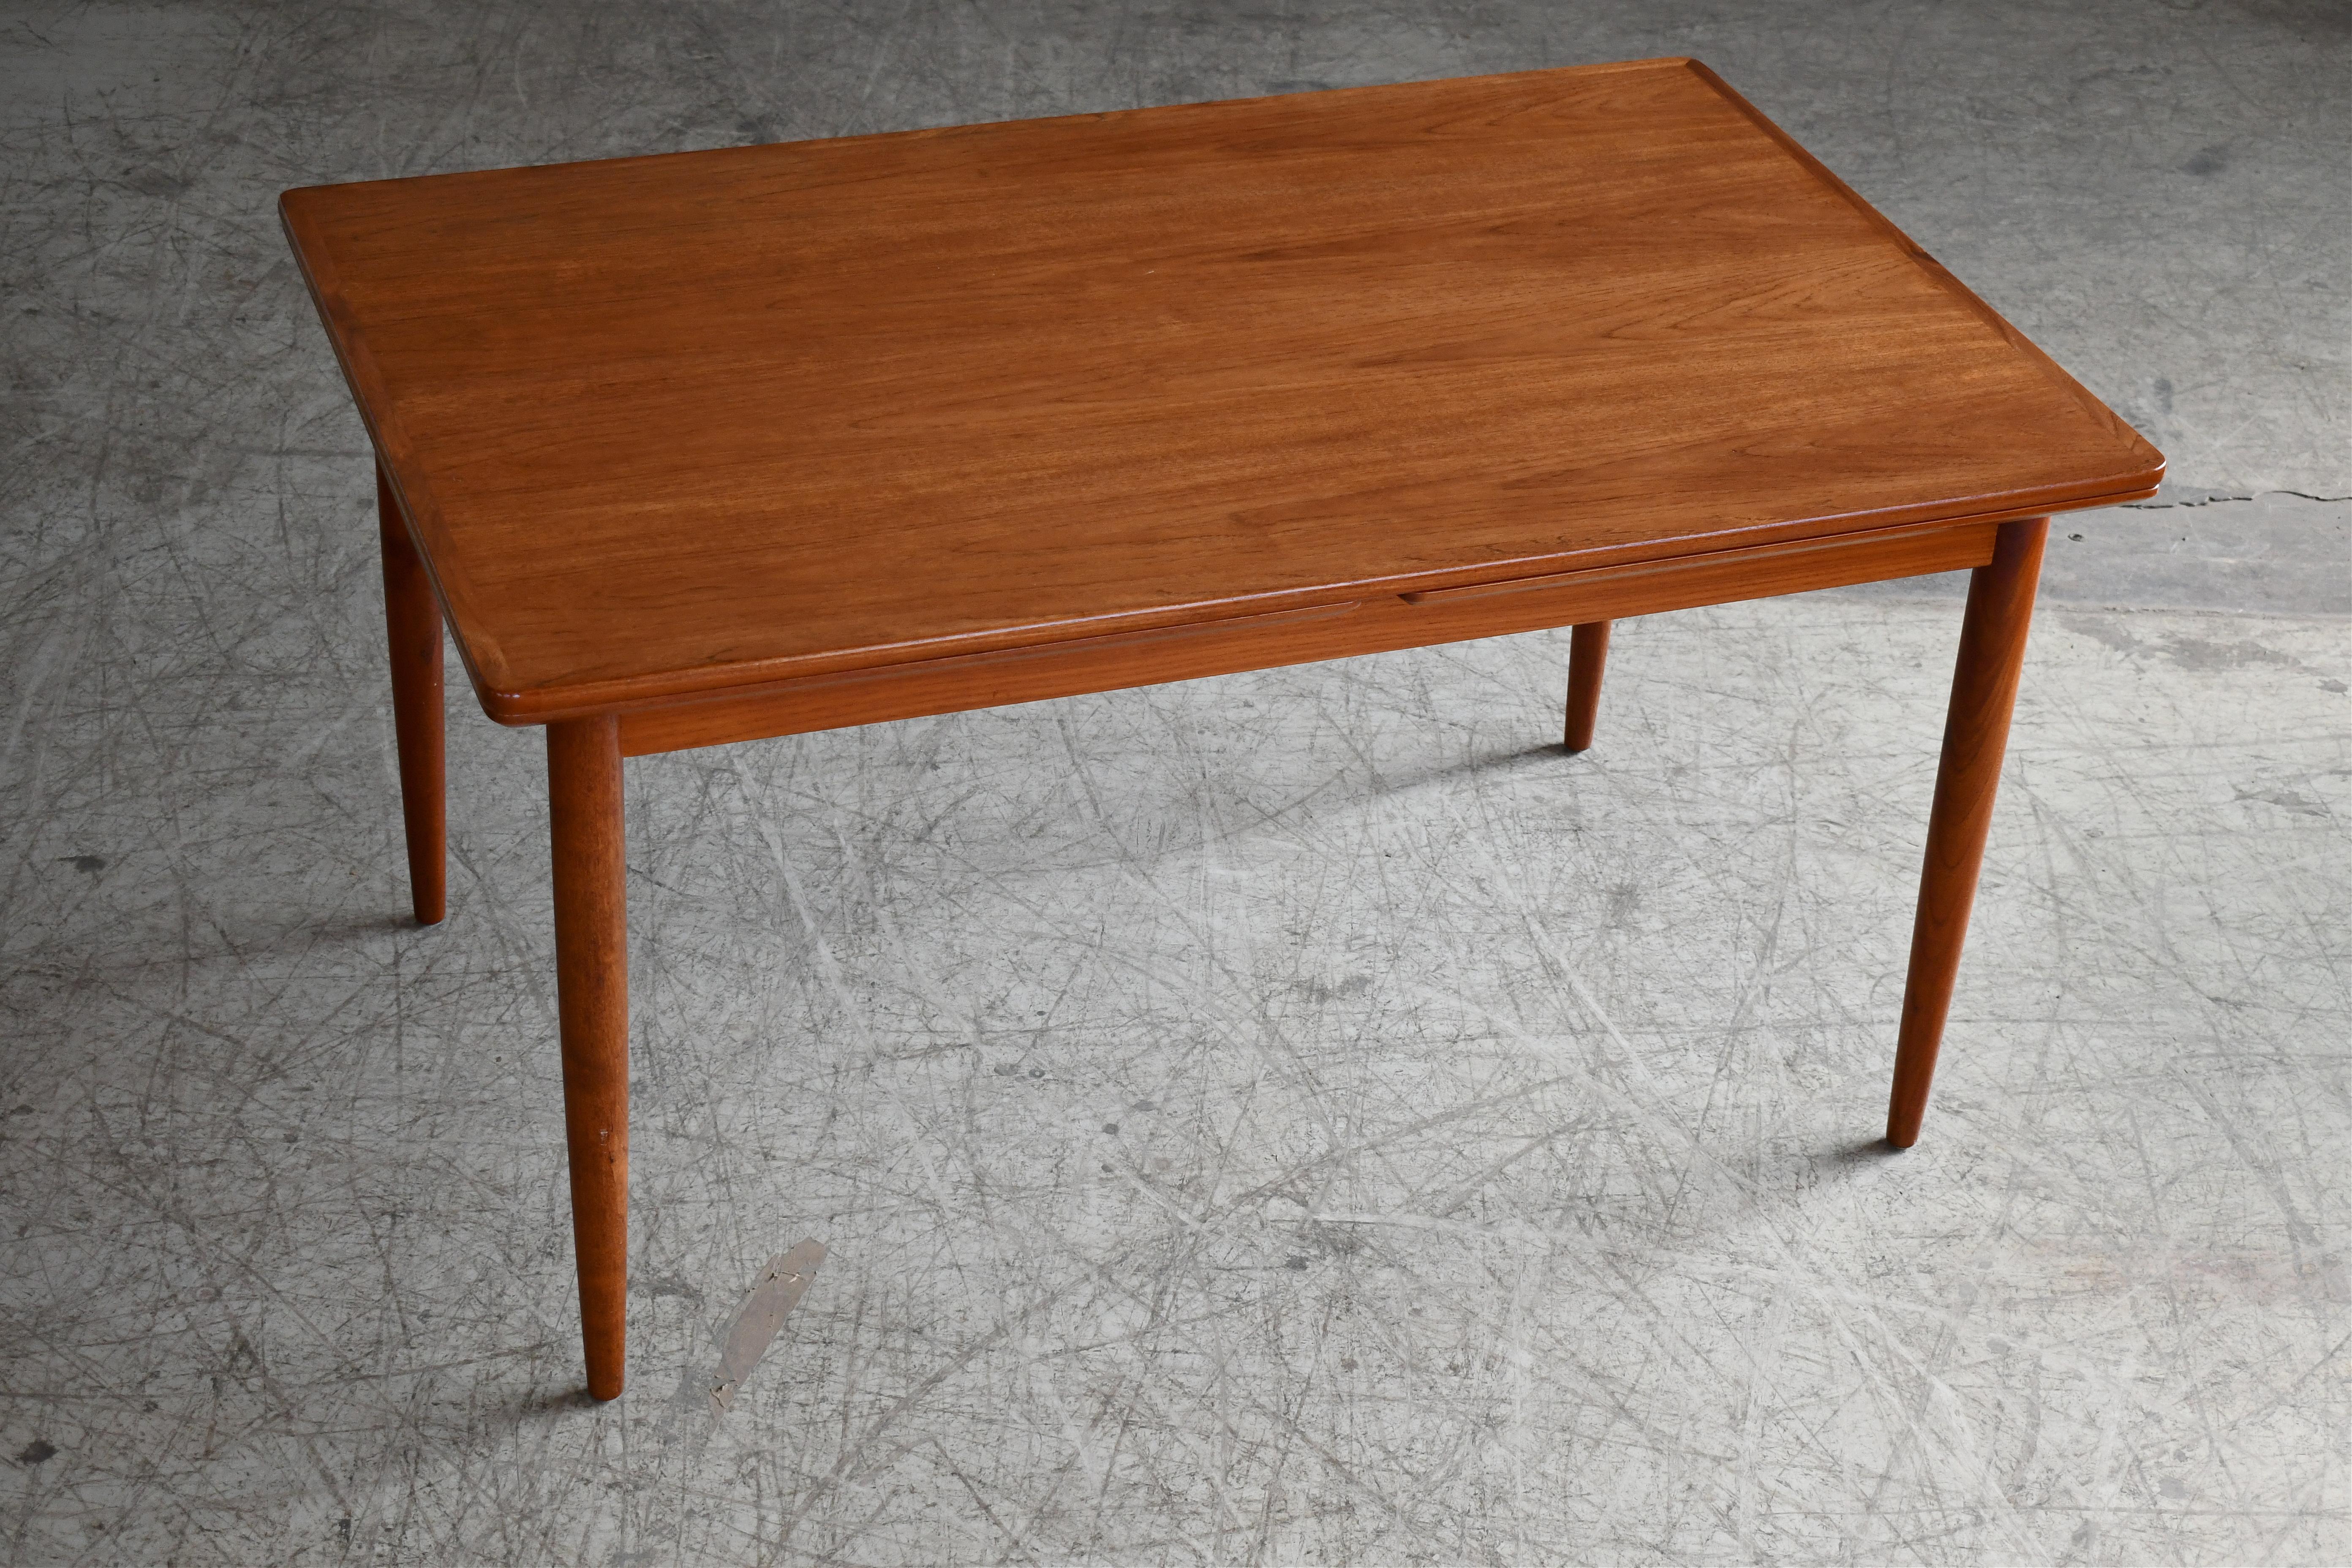 Very nice traditional Danish midcentury dining table with two pull-out leaves made sometime in the 1960's. Made from solid and veneered teak. Very good color and nice grain. Great condition with just very minor age wear. No large scratches of dings.